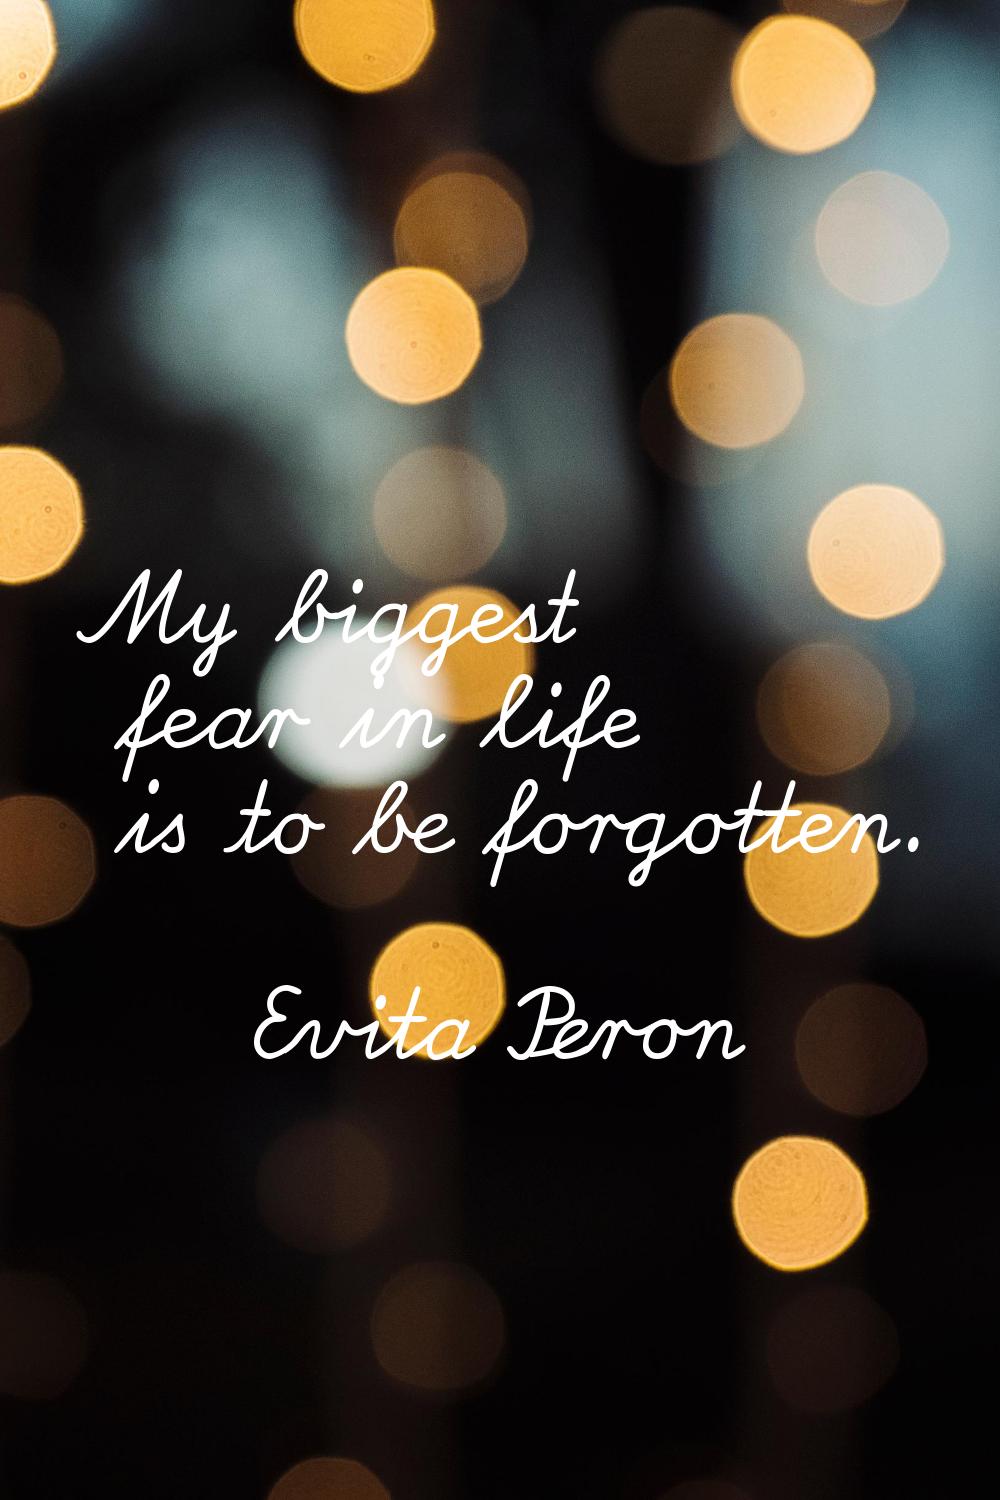 My biggest fear in life is to be forgotten.